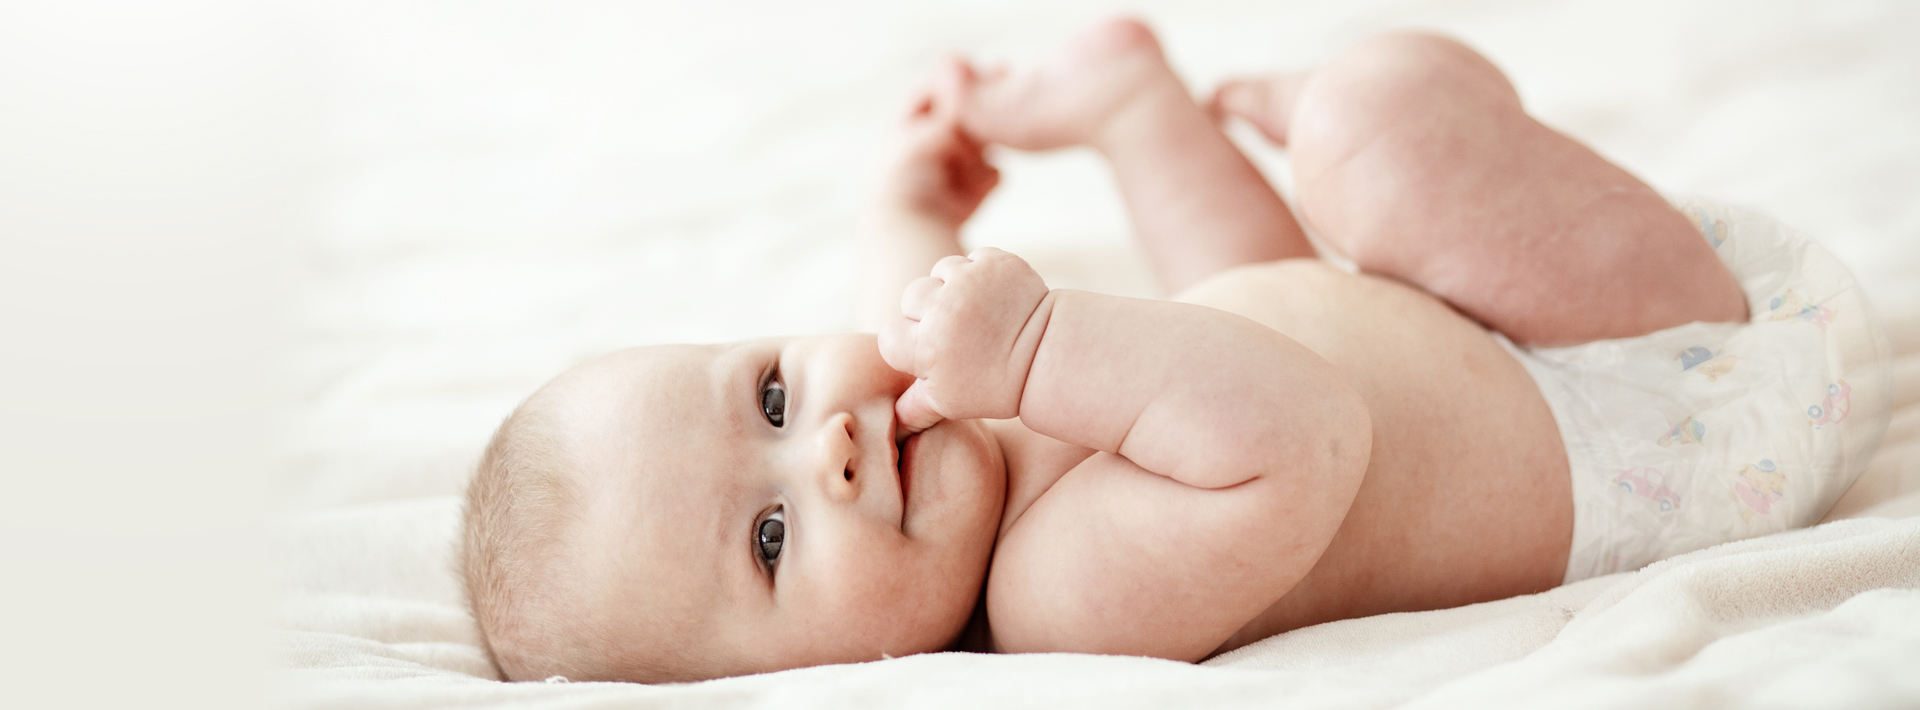 Baby Diapers: Shop for Newborn Baby Diapers | Mothercare India